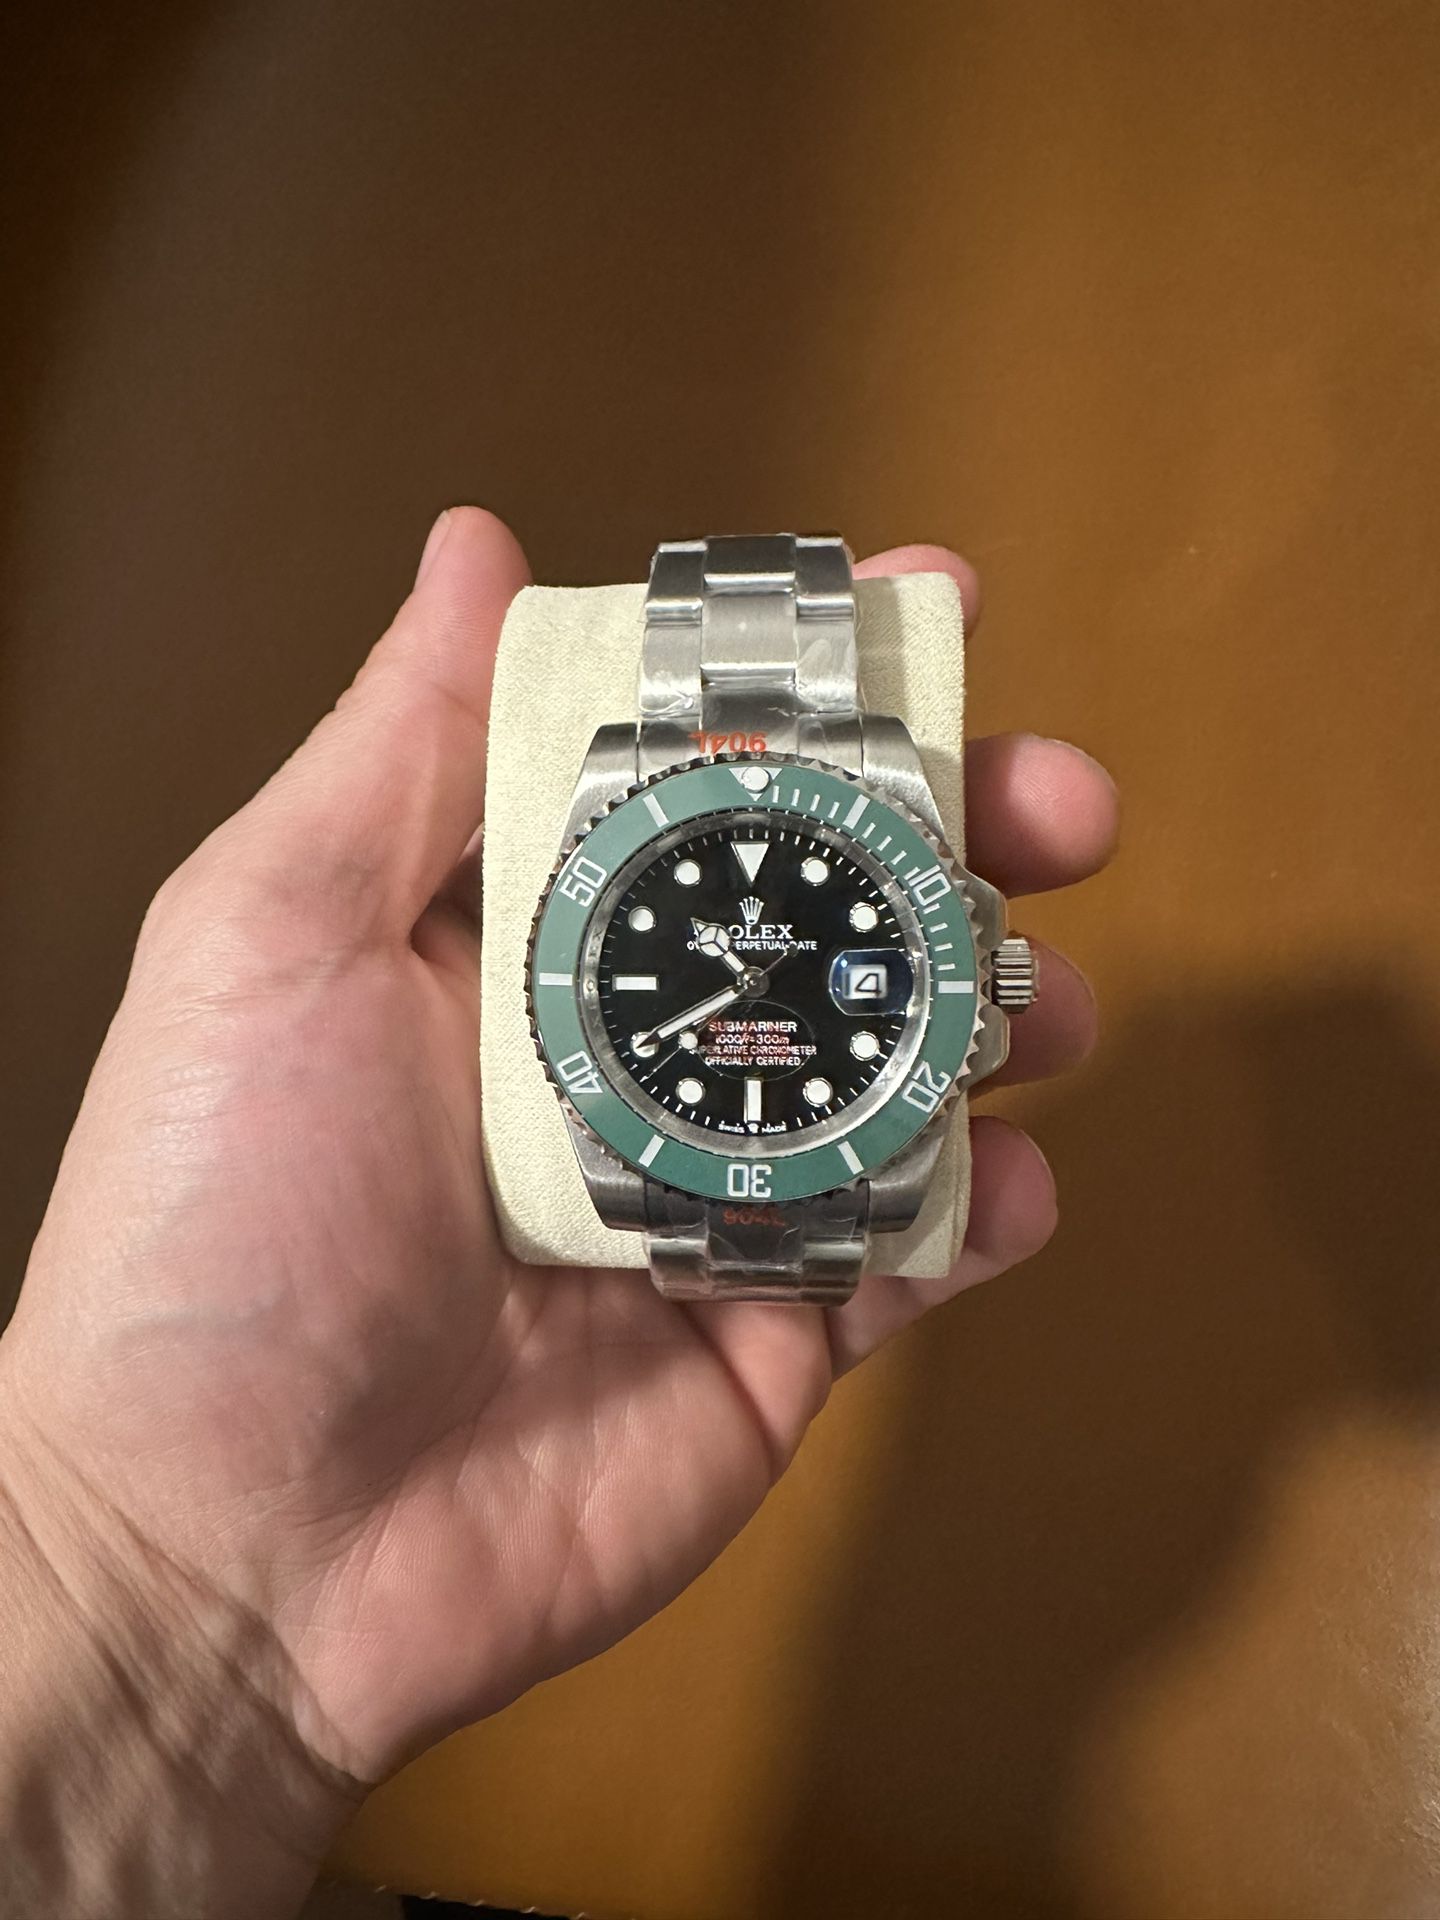 (send best offers) 1:1 submariner (for reselling or personal use)